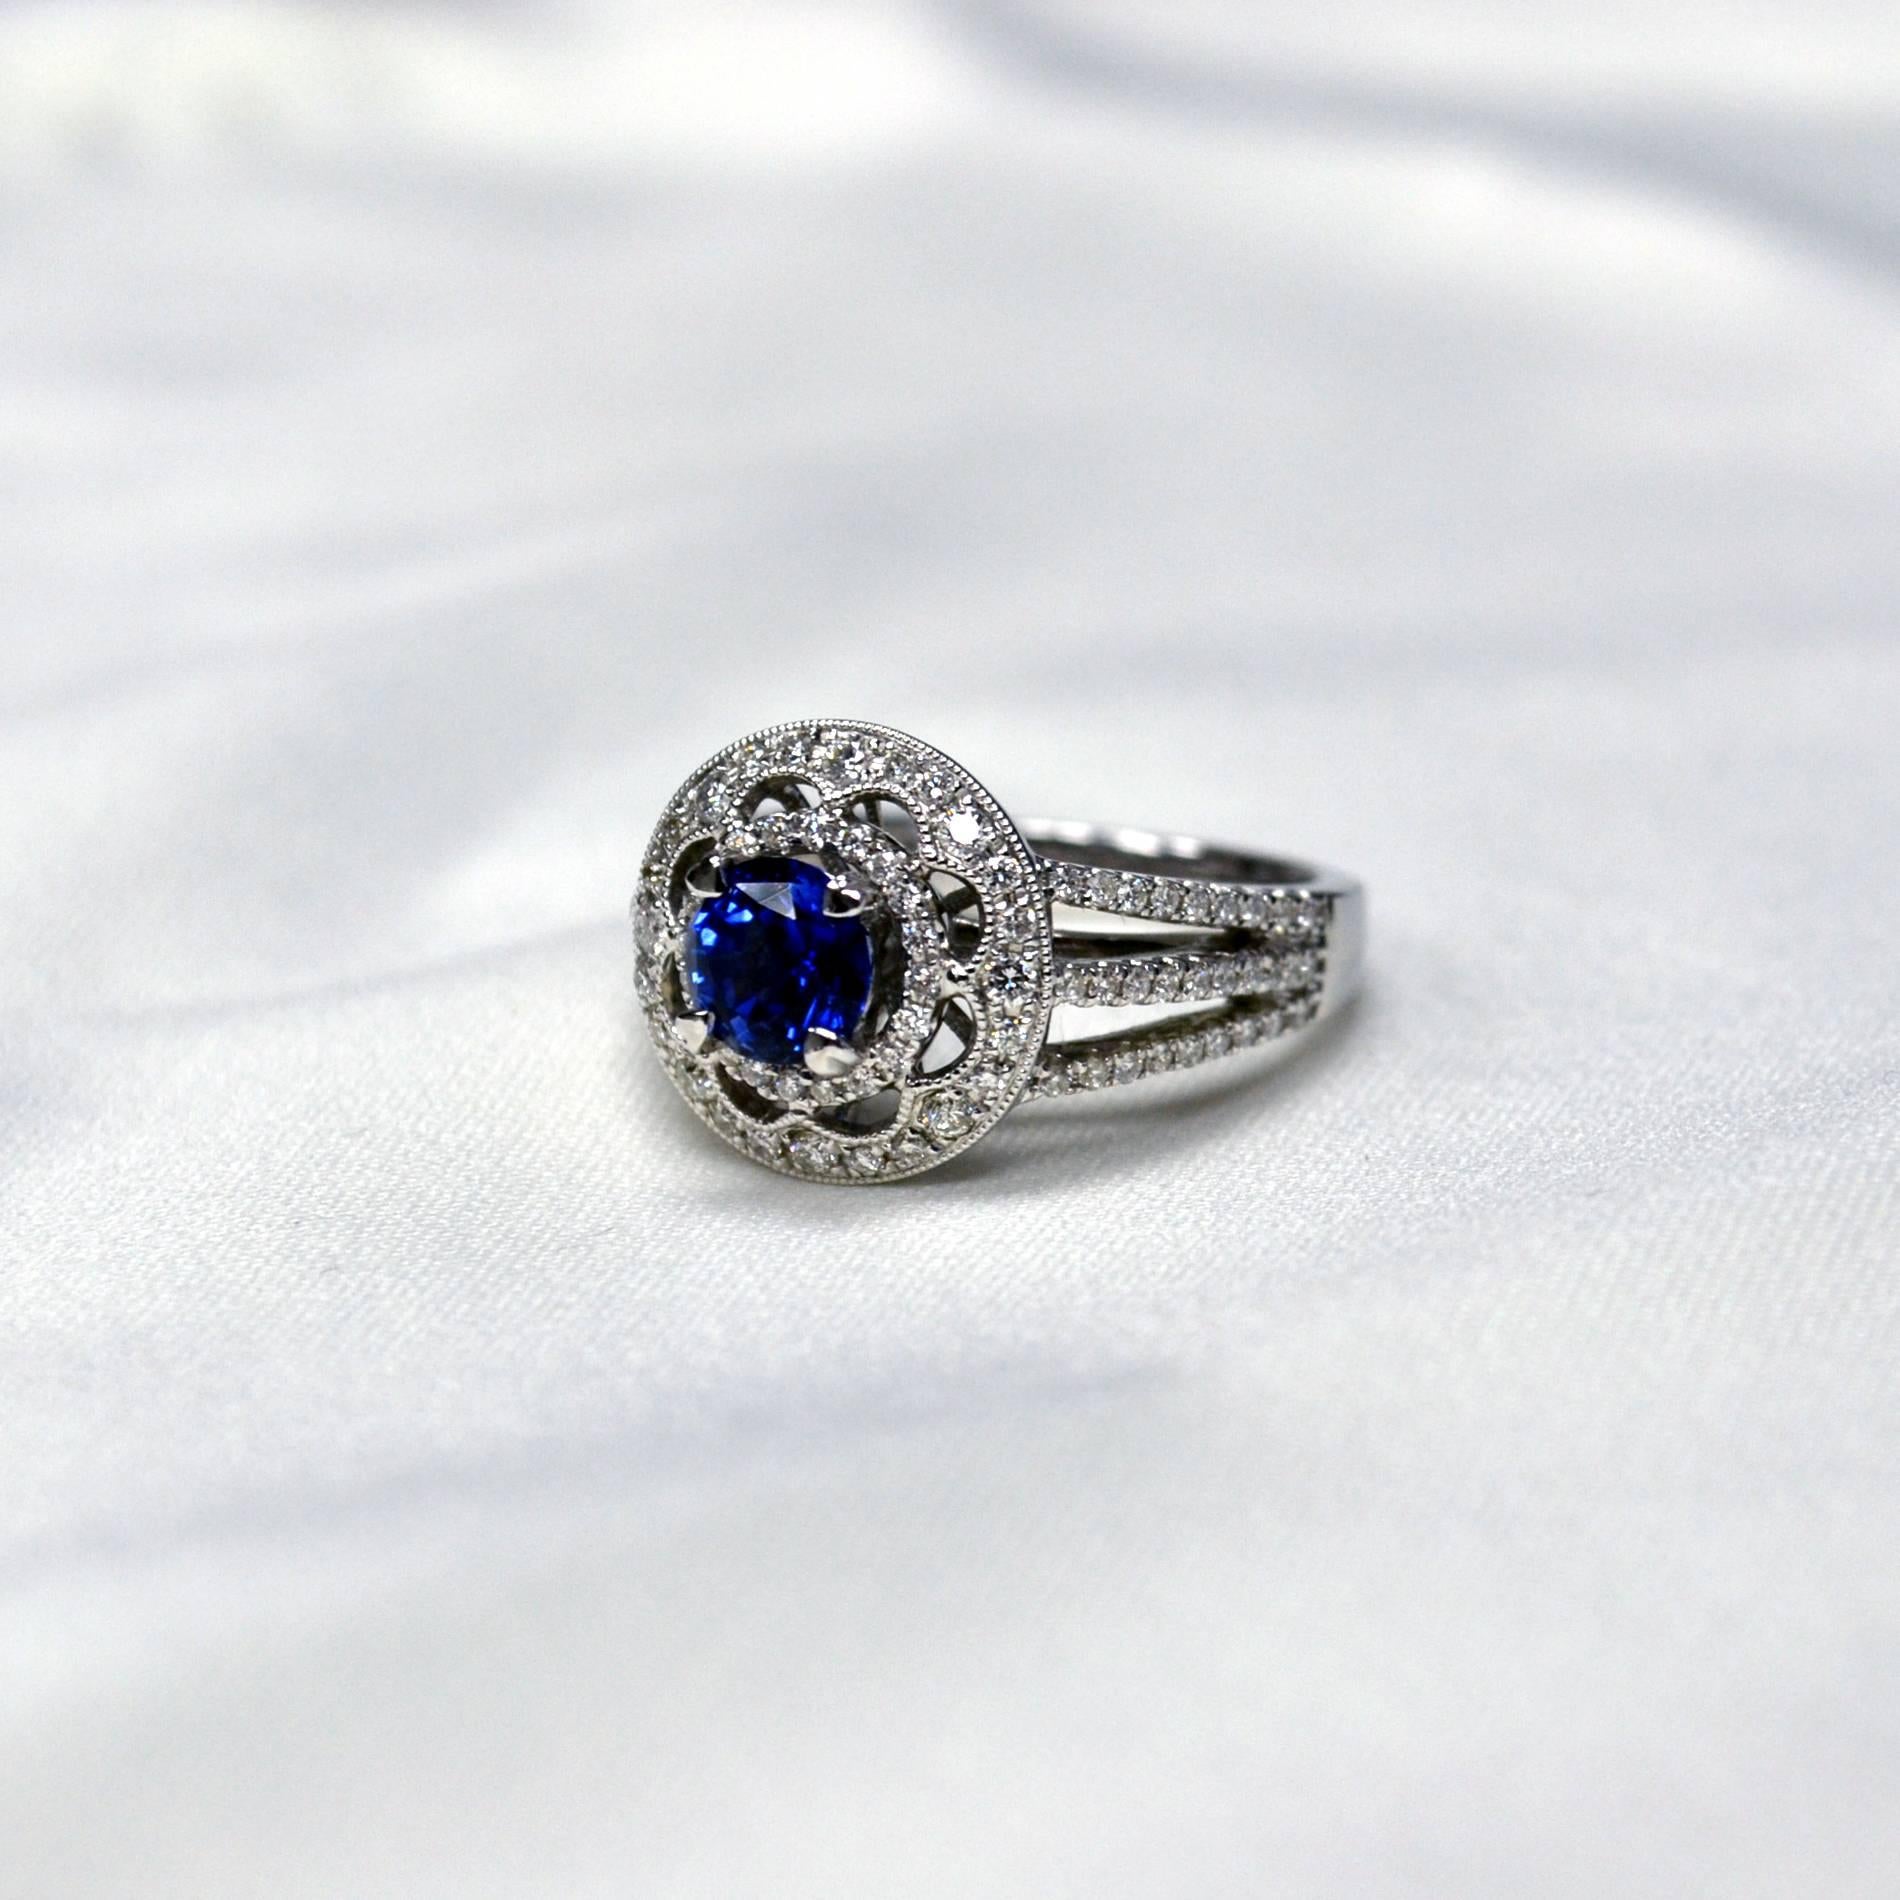 Ring in 18 karat white gold set with one round cut vivid blue Ceylon Blue Sapphire (1.13 carat) and 100 round brilliant-cut Diamonds (0.62 carats)

Ring US Size 6
*Complimentary resizing service*